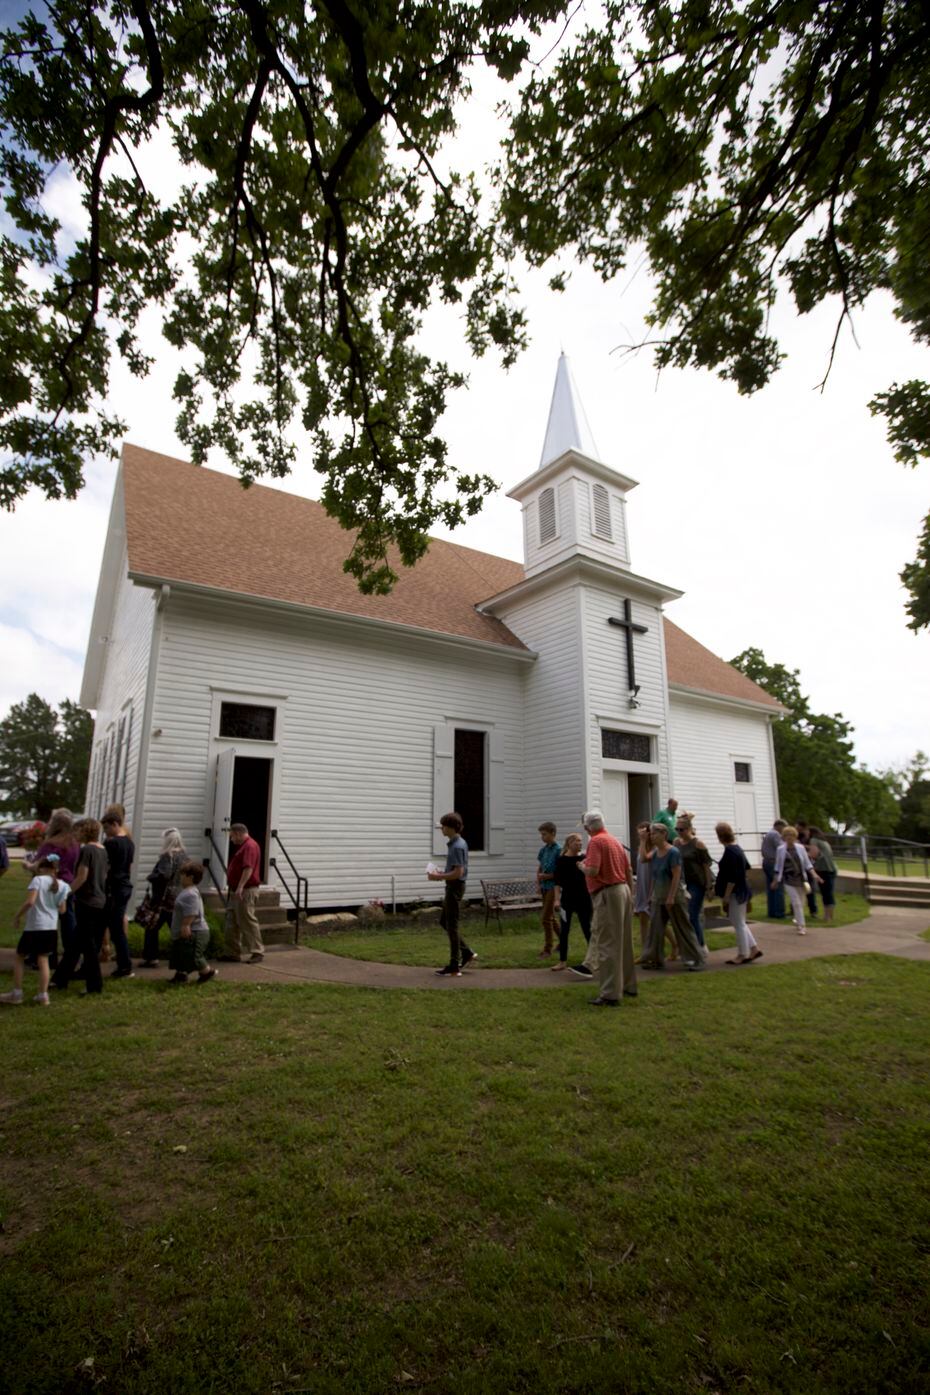 Churchgoers file out of College Mound United Methodist Church to enjoy the 2019 Decoration Day feast. Members of the community 40 miles east of Dallas have honored their ancestors with grave-site flowers and a feast in a tradition that dates back 134 years.